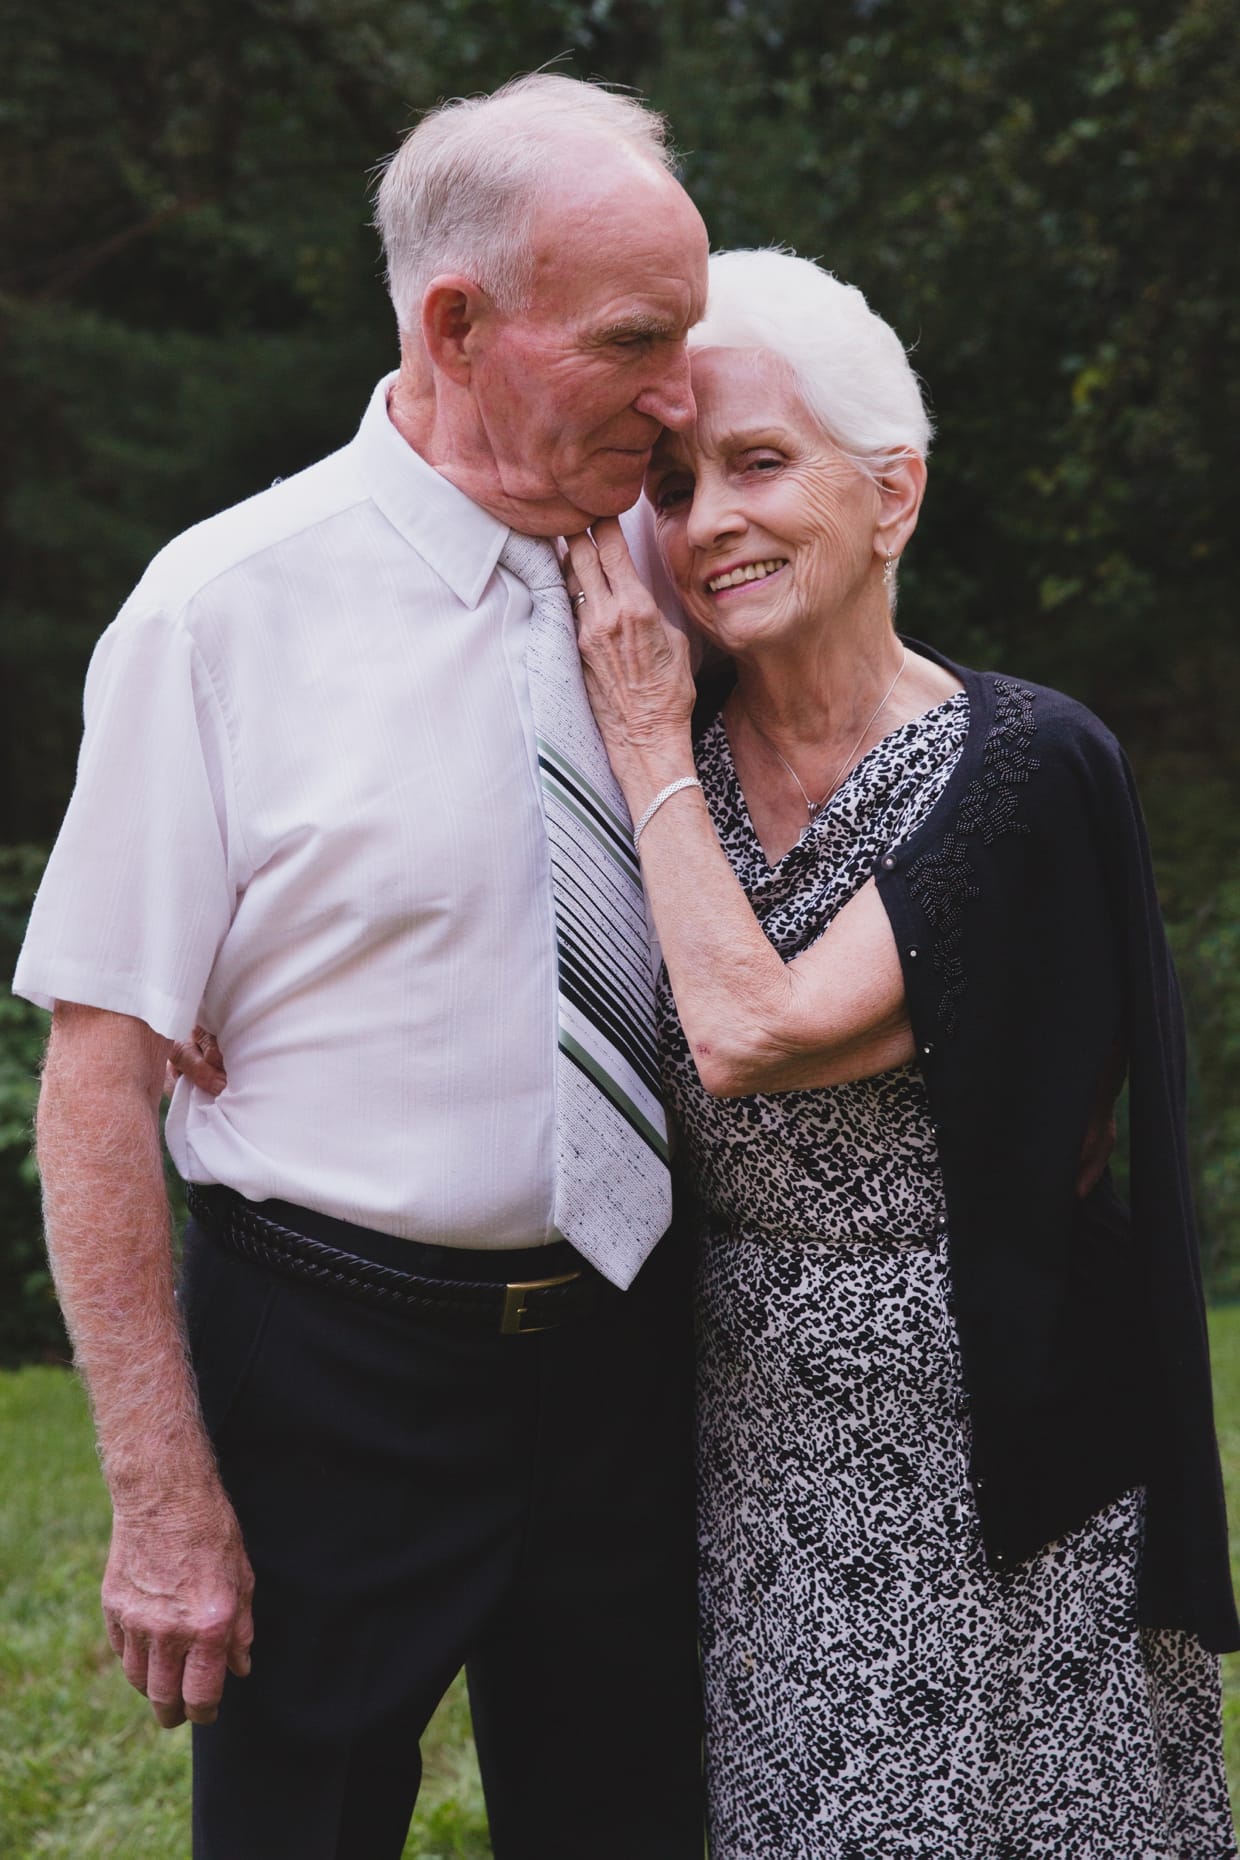 A sweet portrait of the brides grandparents during a backyard wedding in Massachusetts